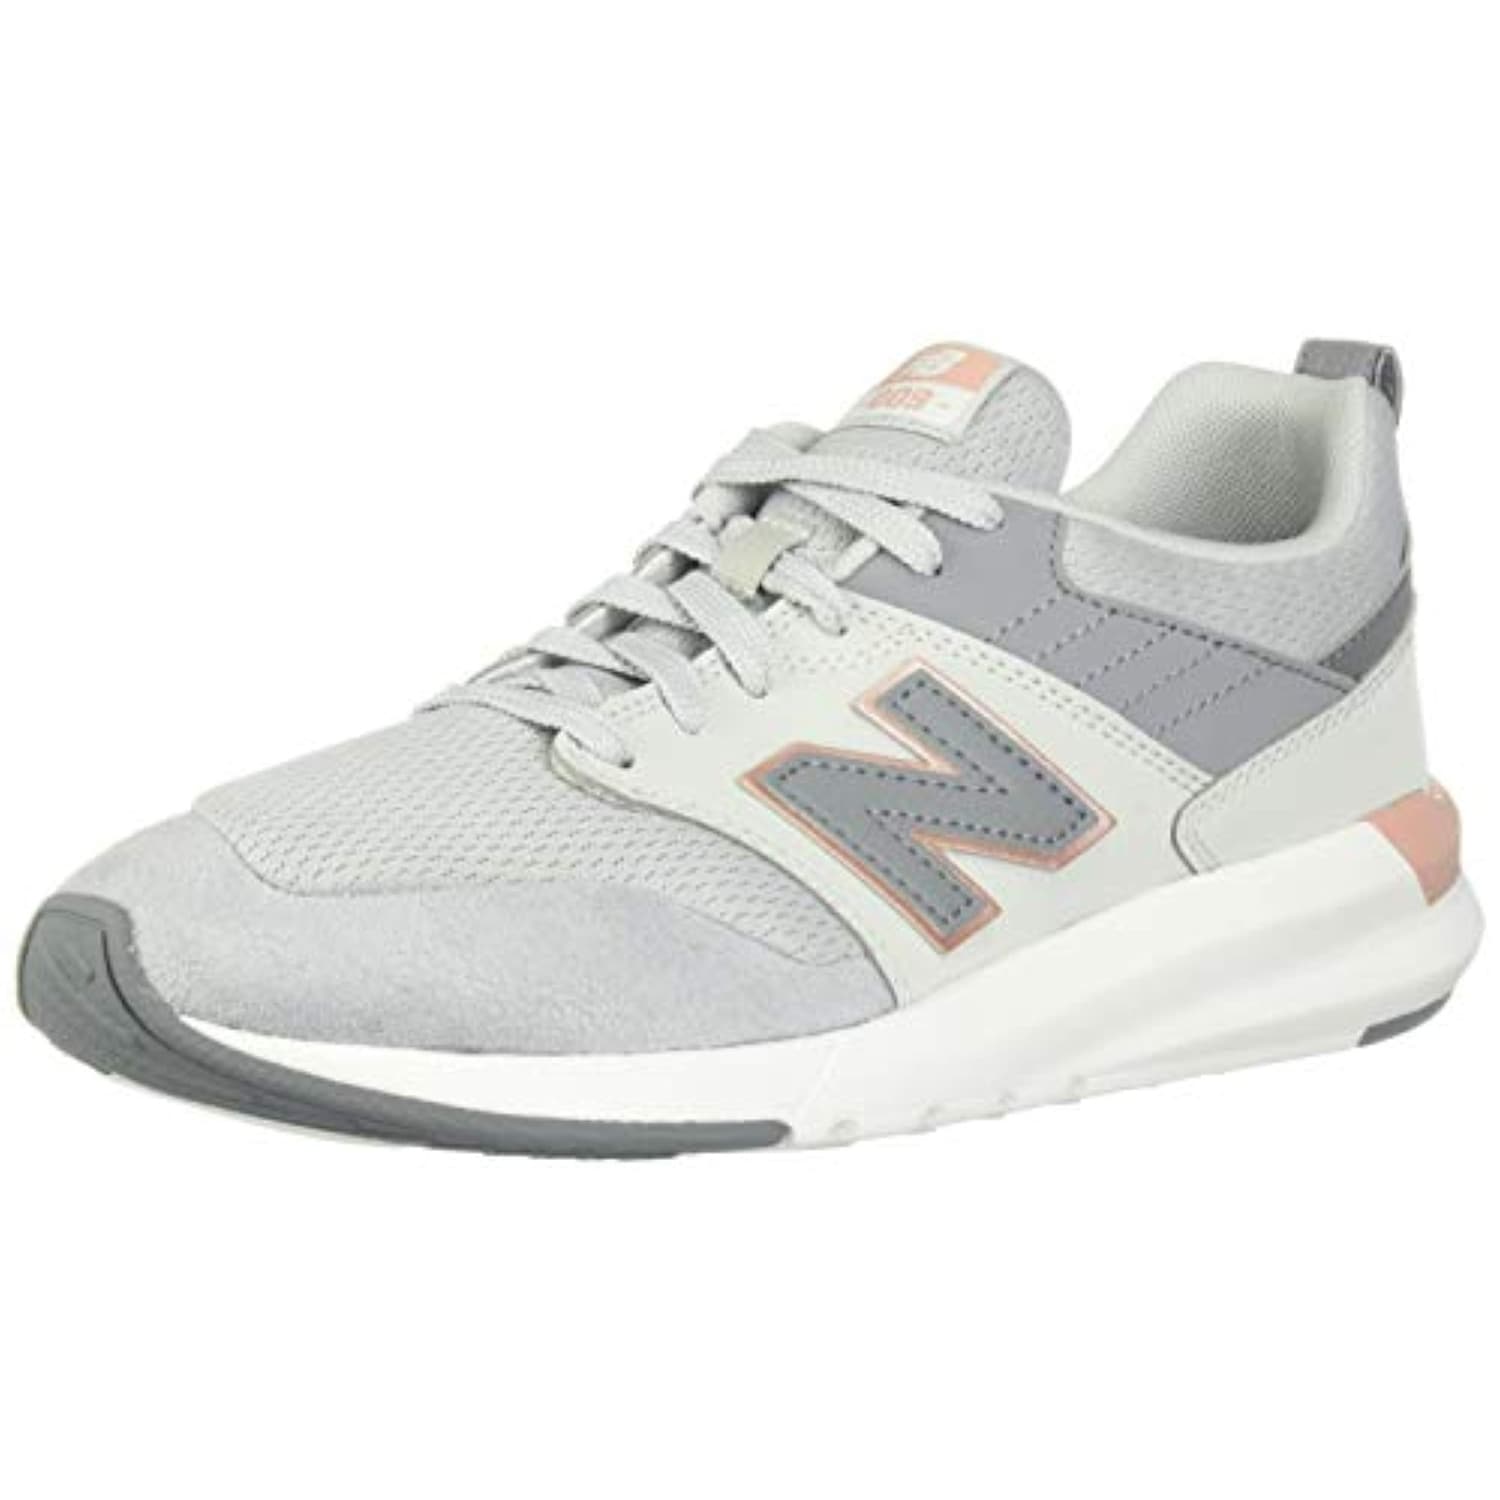 new balance rose gold sneakers